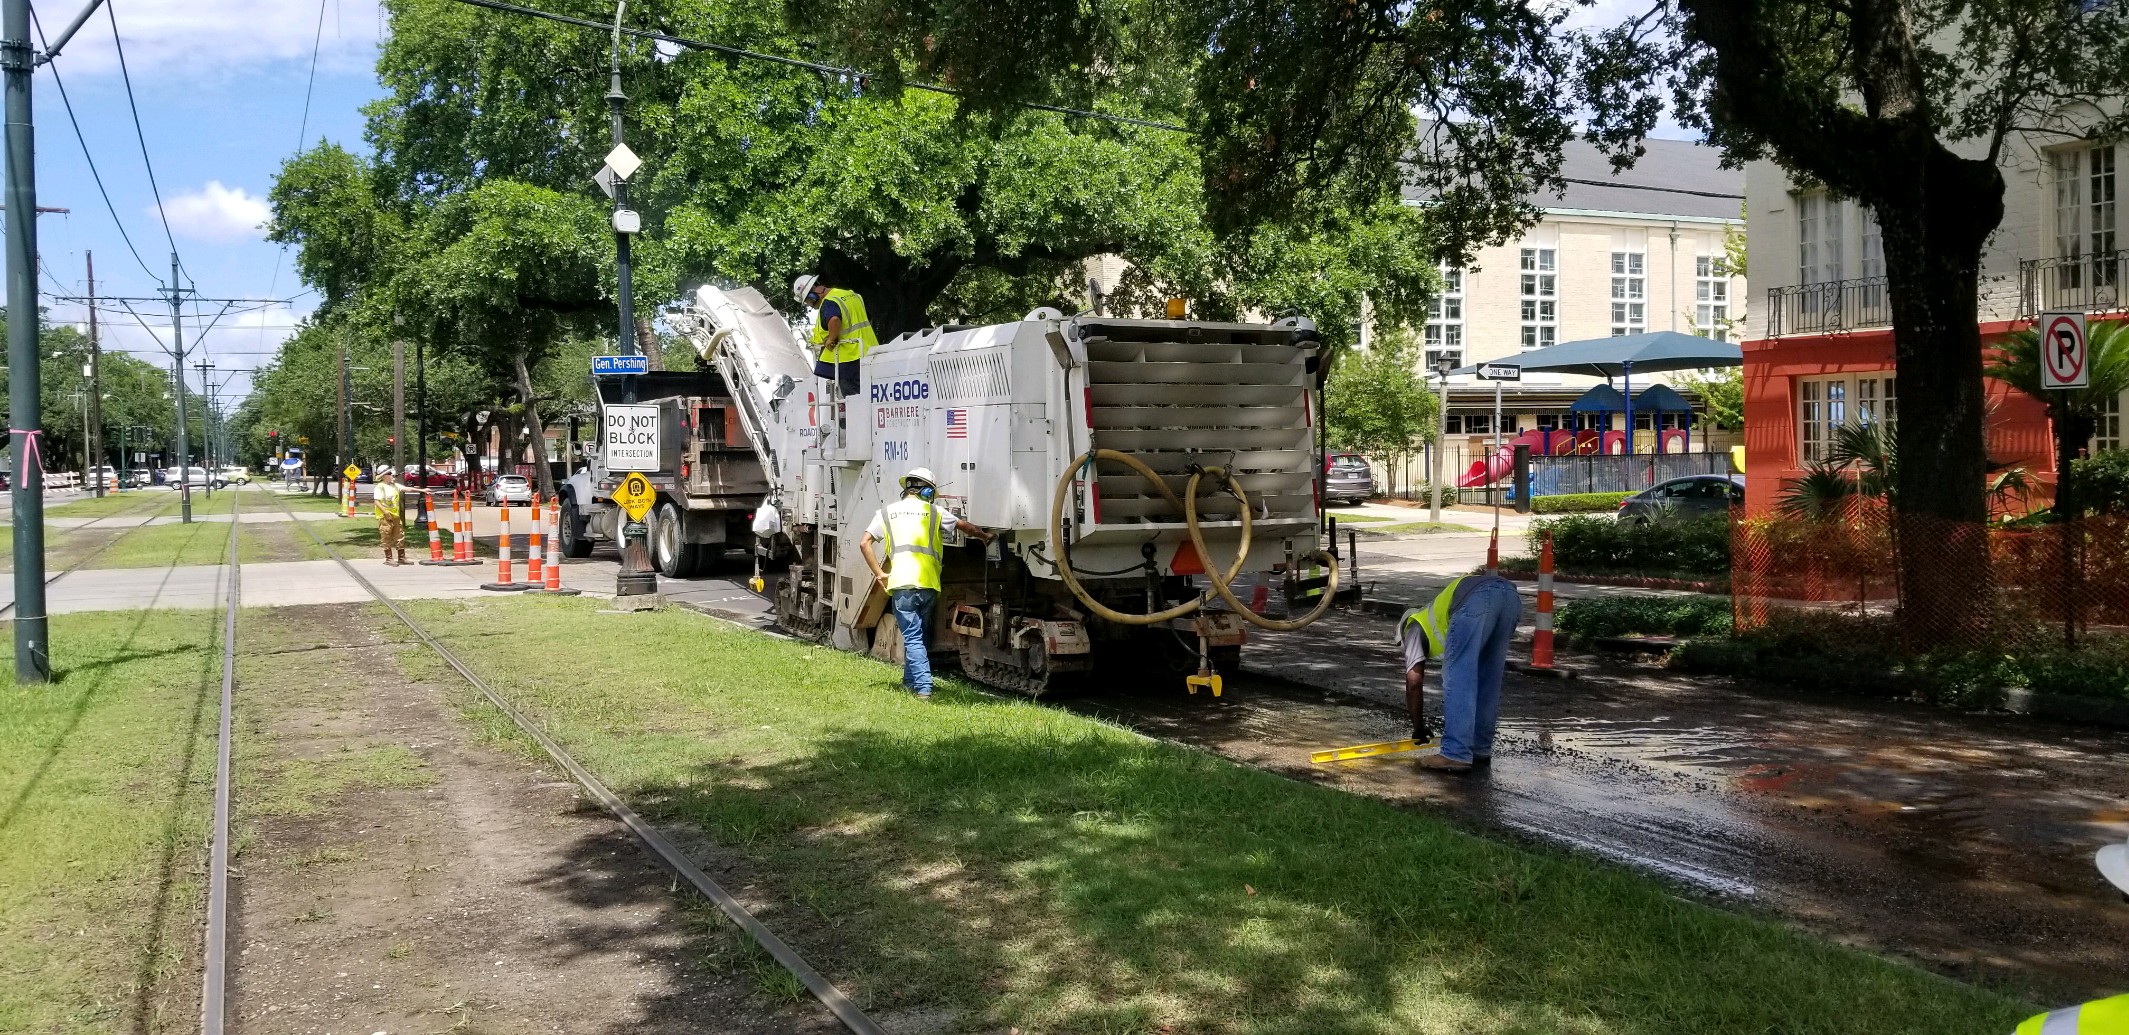 CREWS SET TO BEGIN FORMING AND POURING OF ADA RAMPS ON ST. CHARLES